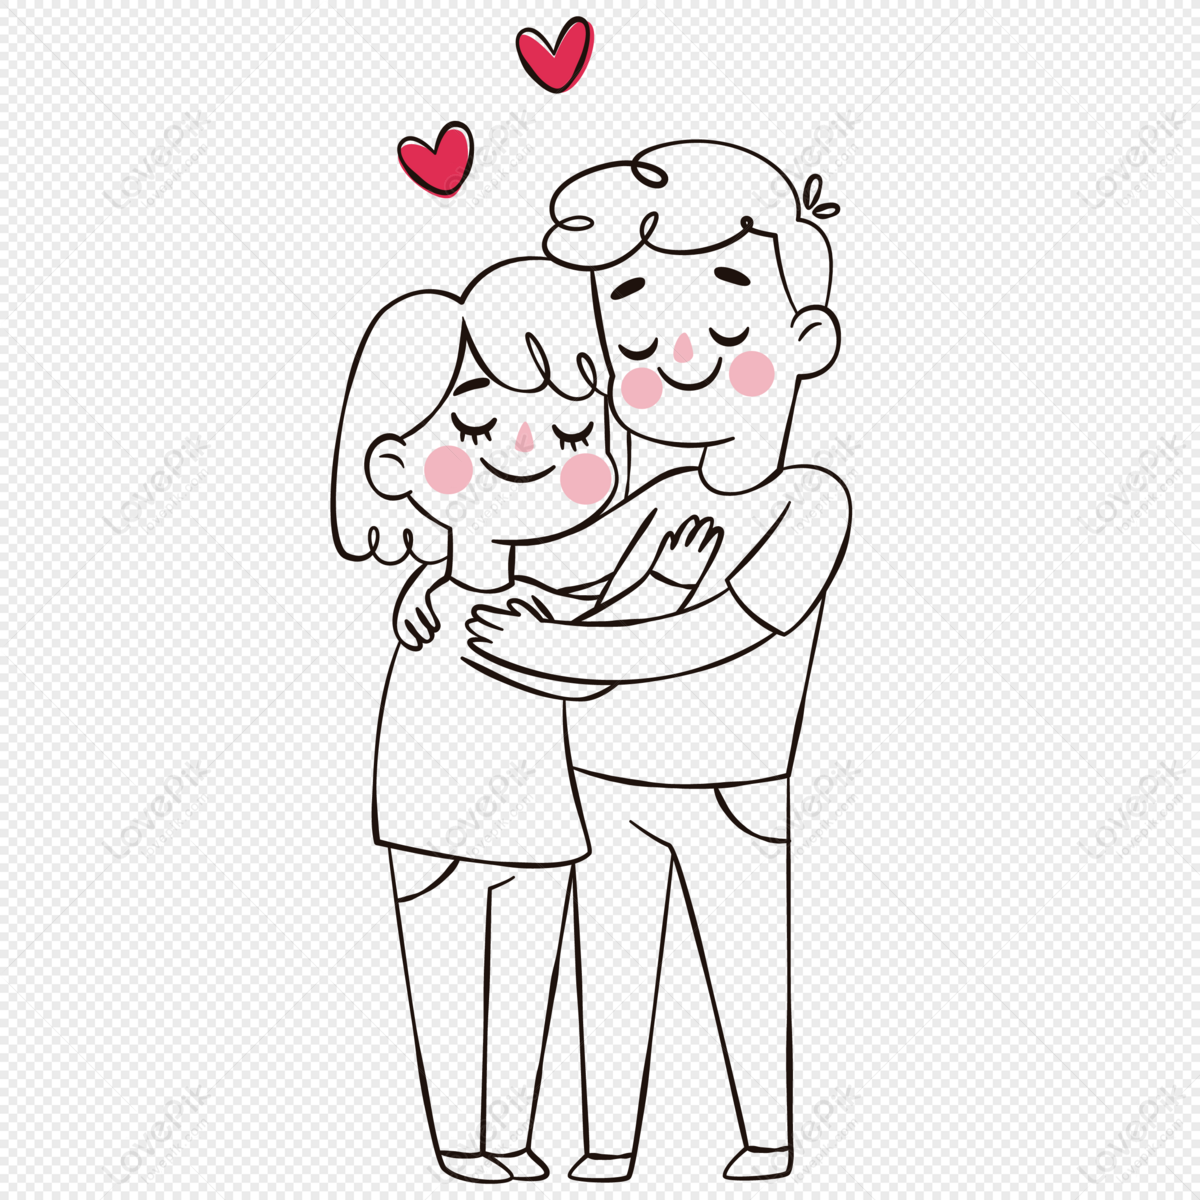 Simple Line Drawing Couples Embrace Each Other Sweetly, Date, Couple